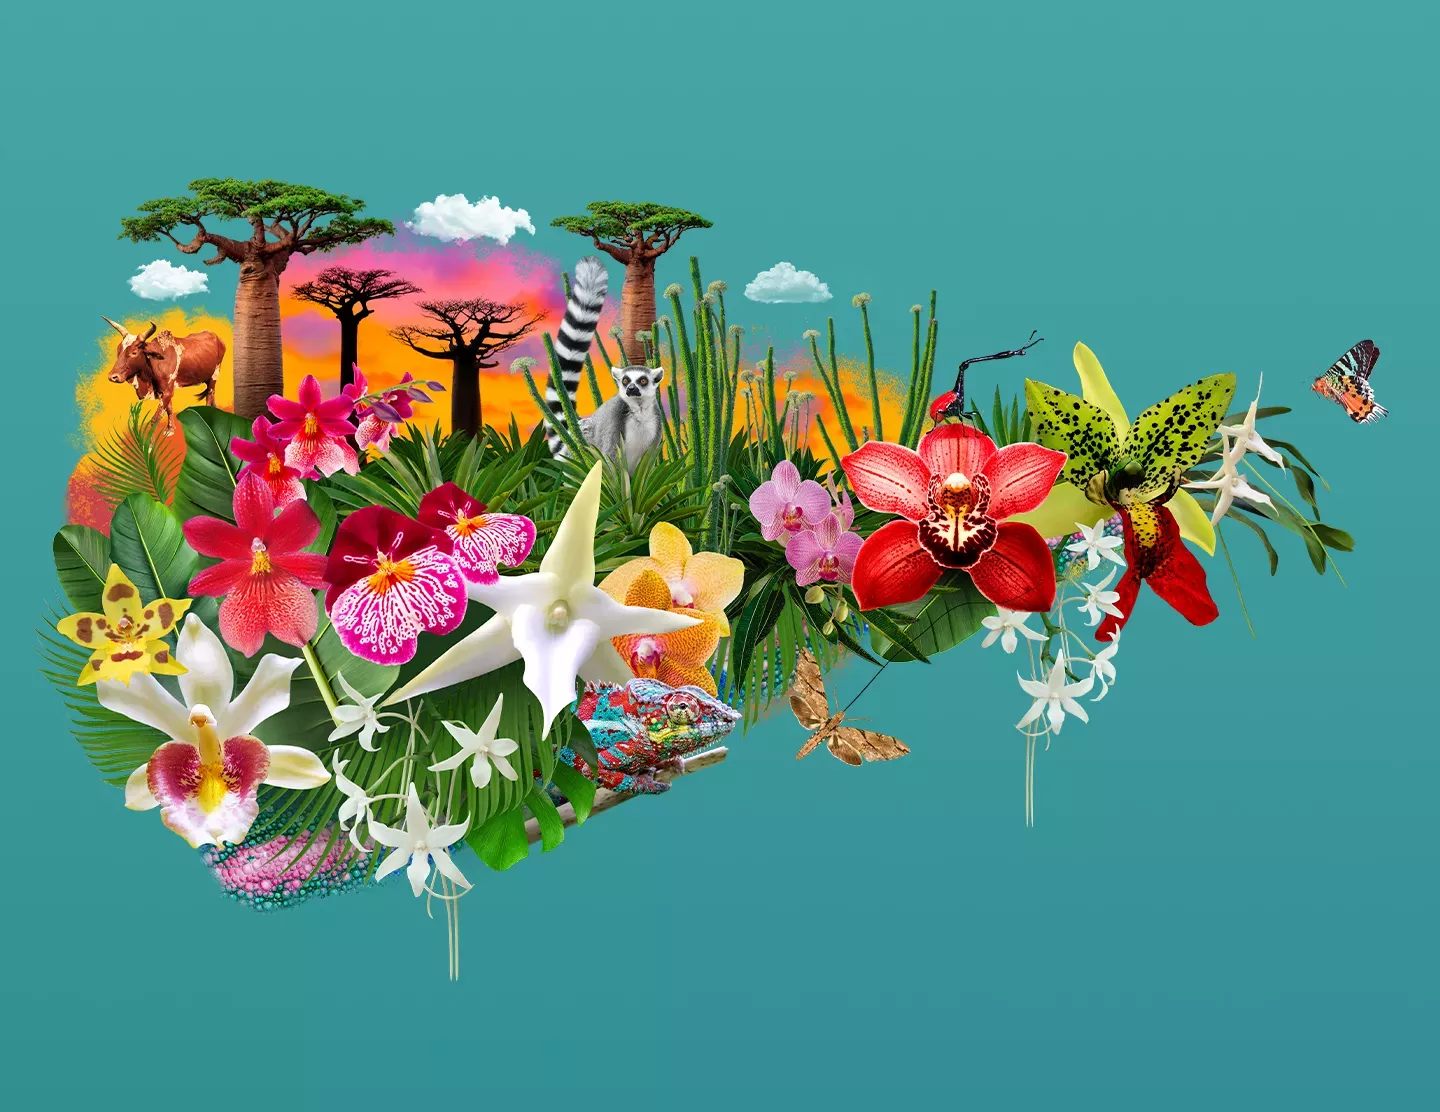 Collage of native flora and fauna of Madagascar